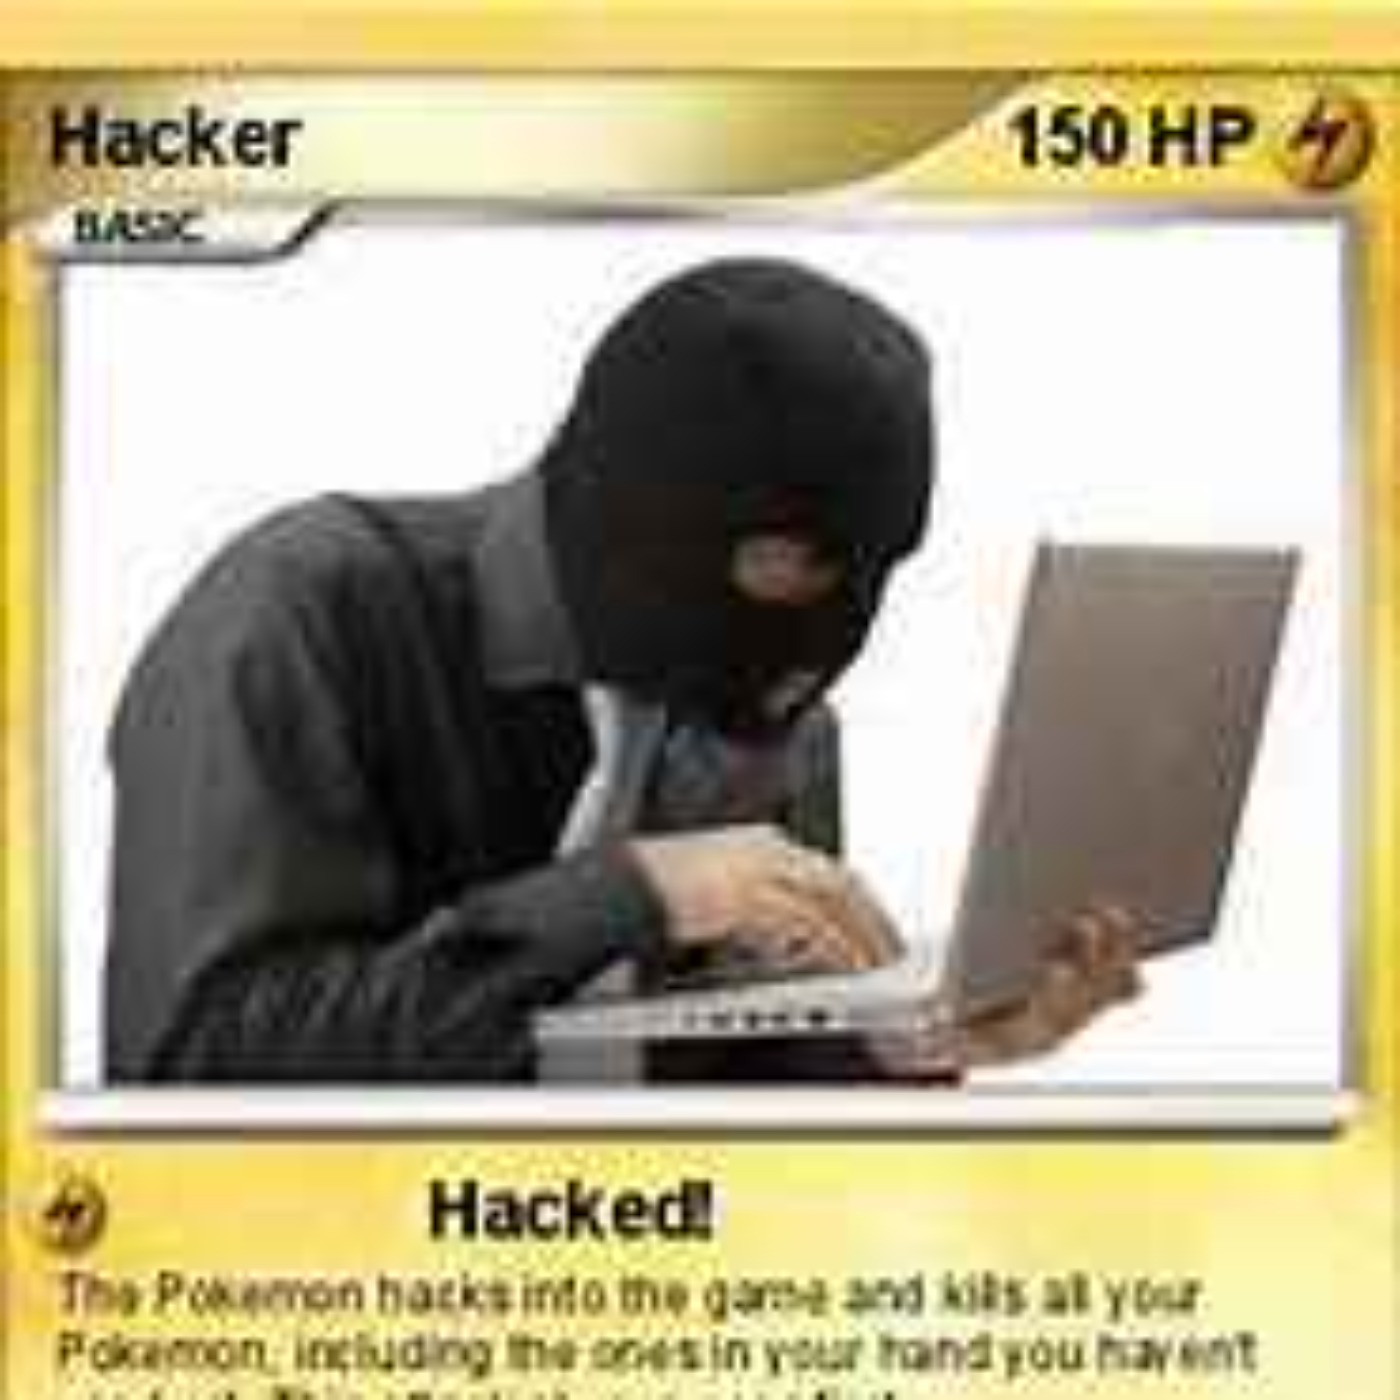 cover art for 0.1% of Poke Acc. were attempted to be hacked, but don't worry "It wasn't an attack" 